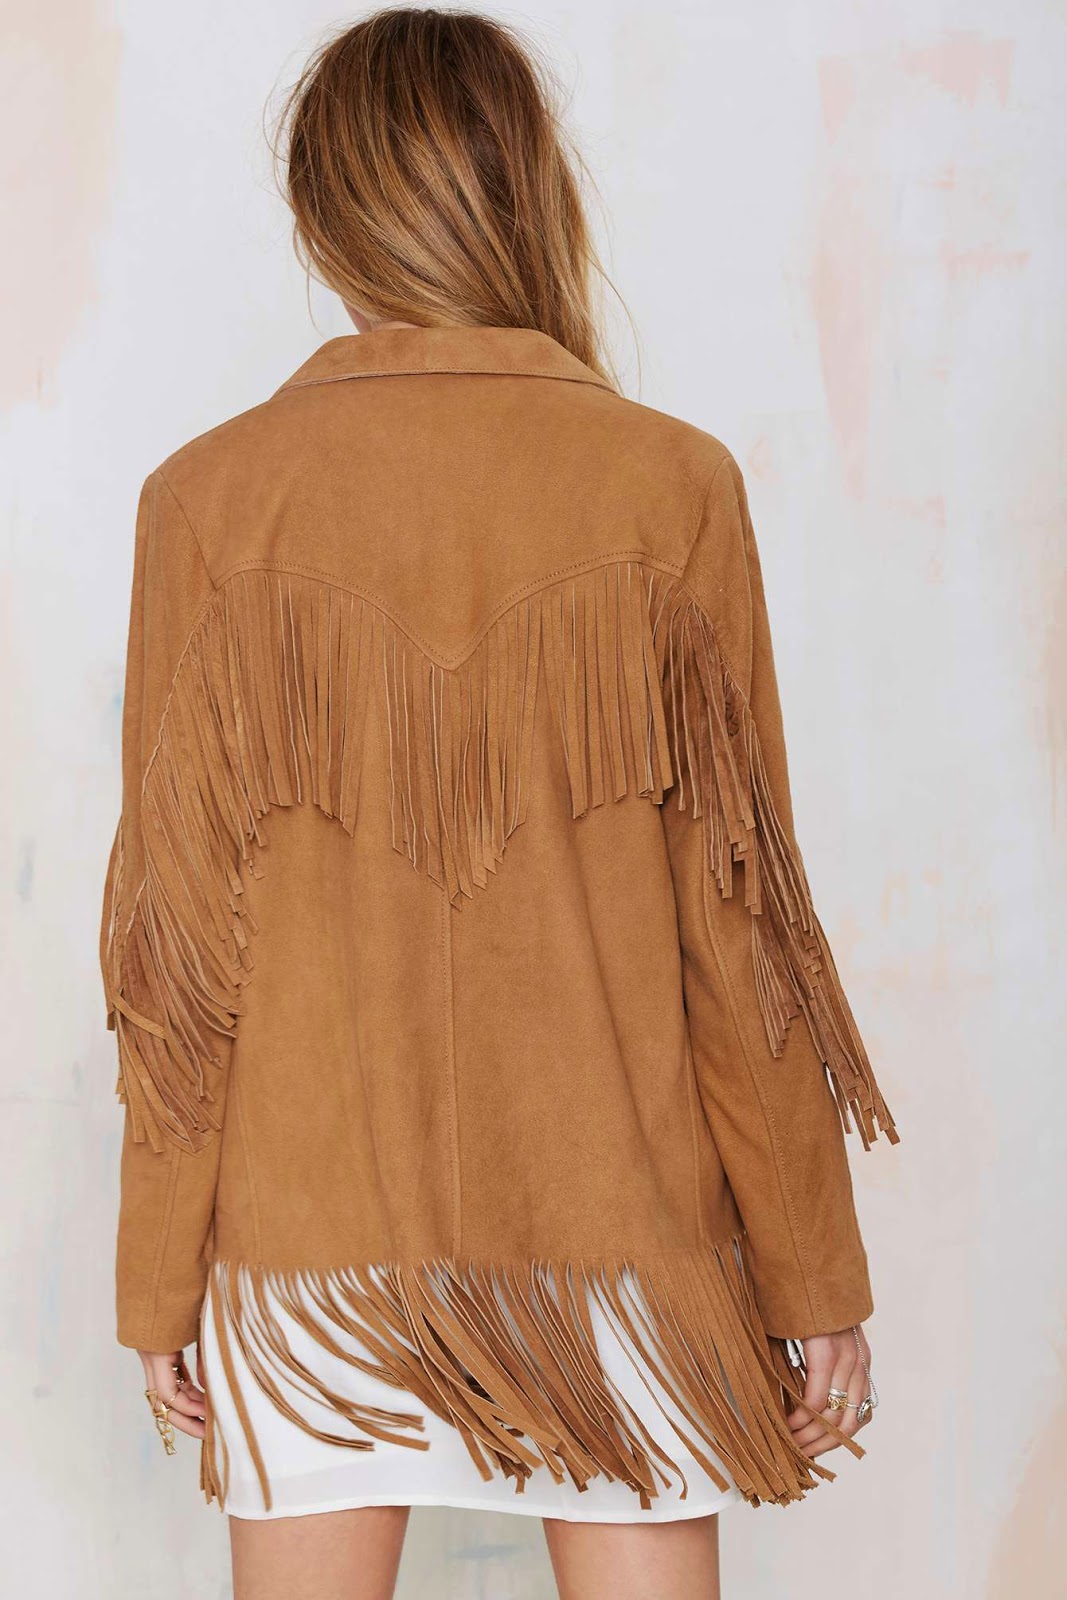 THE SAVVY SHOPPER: On The Fringe Trend